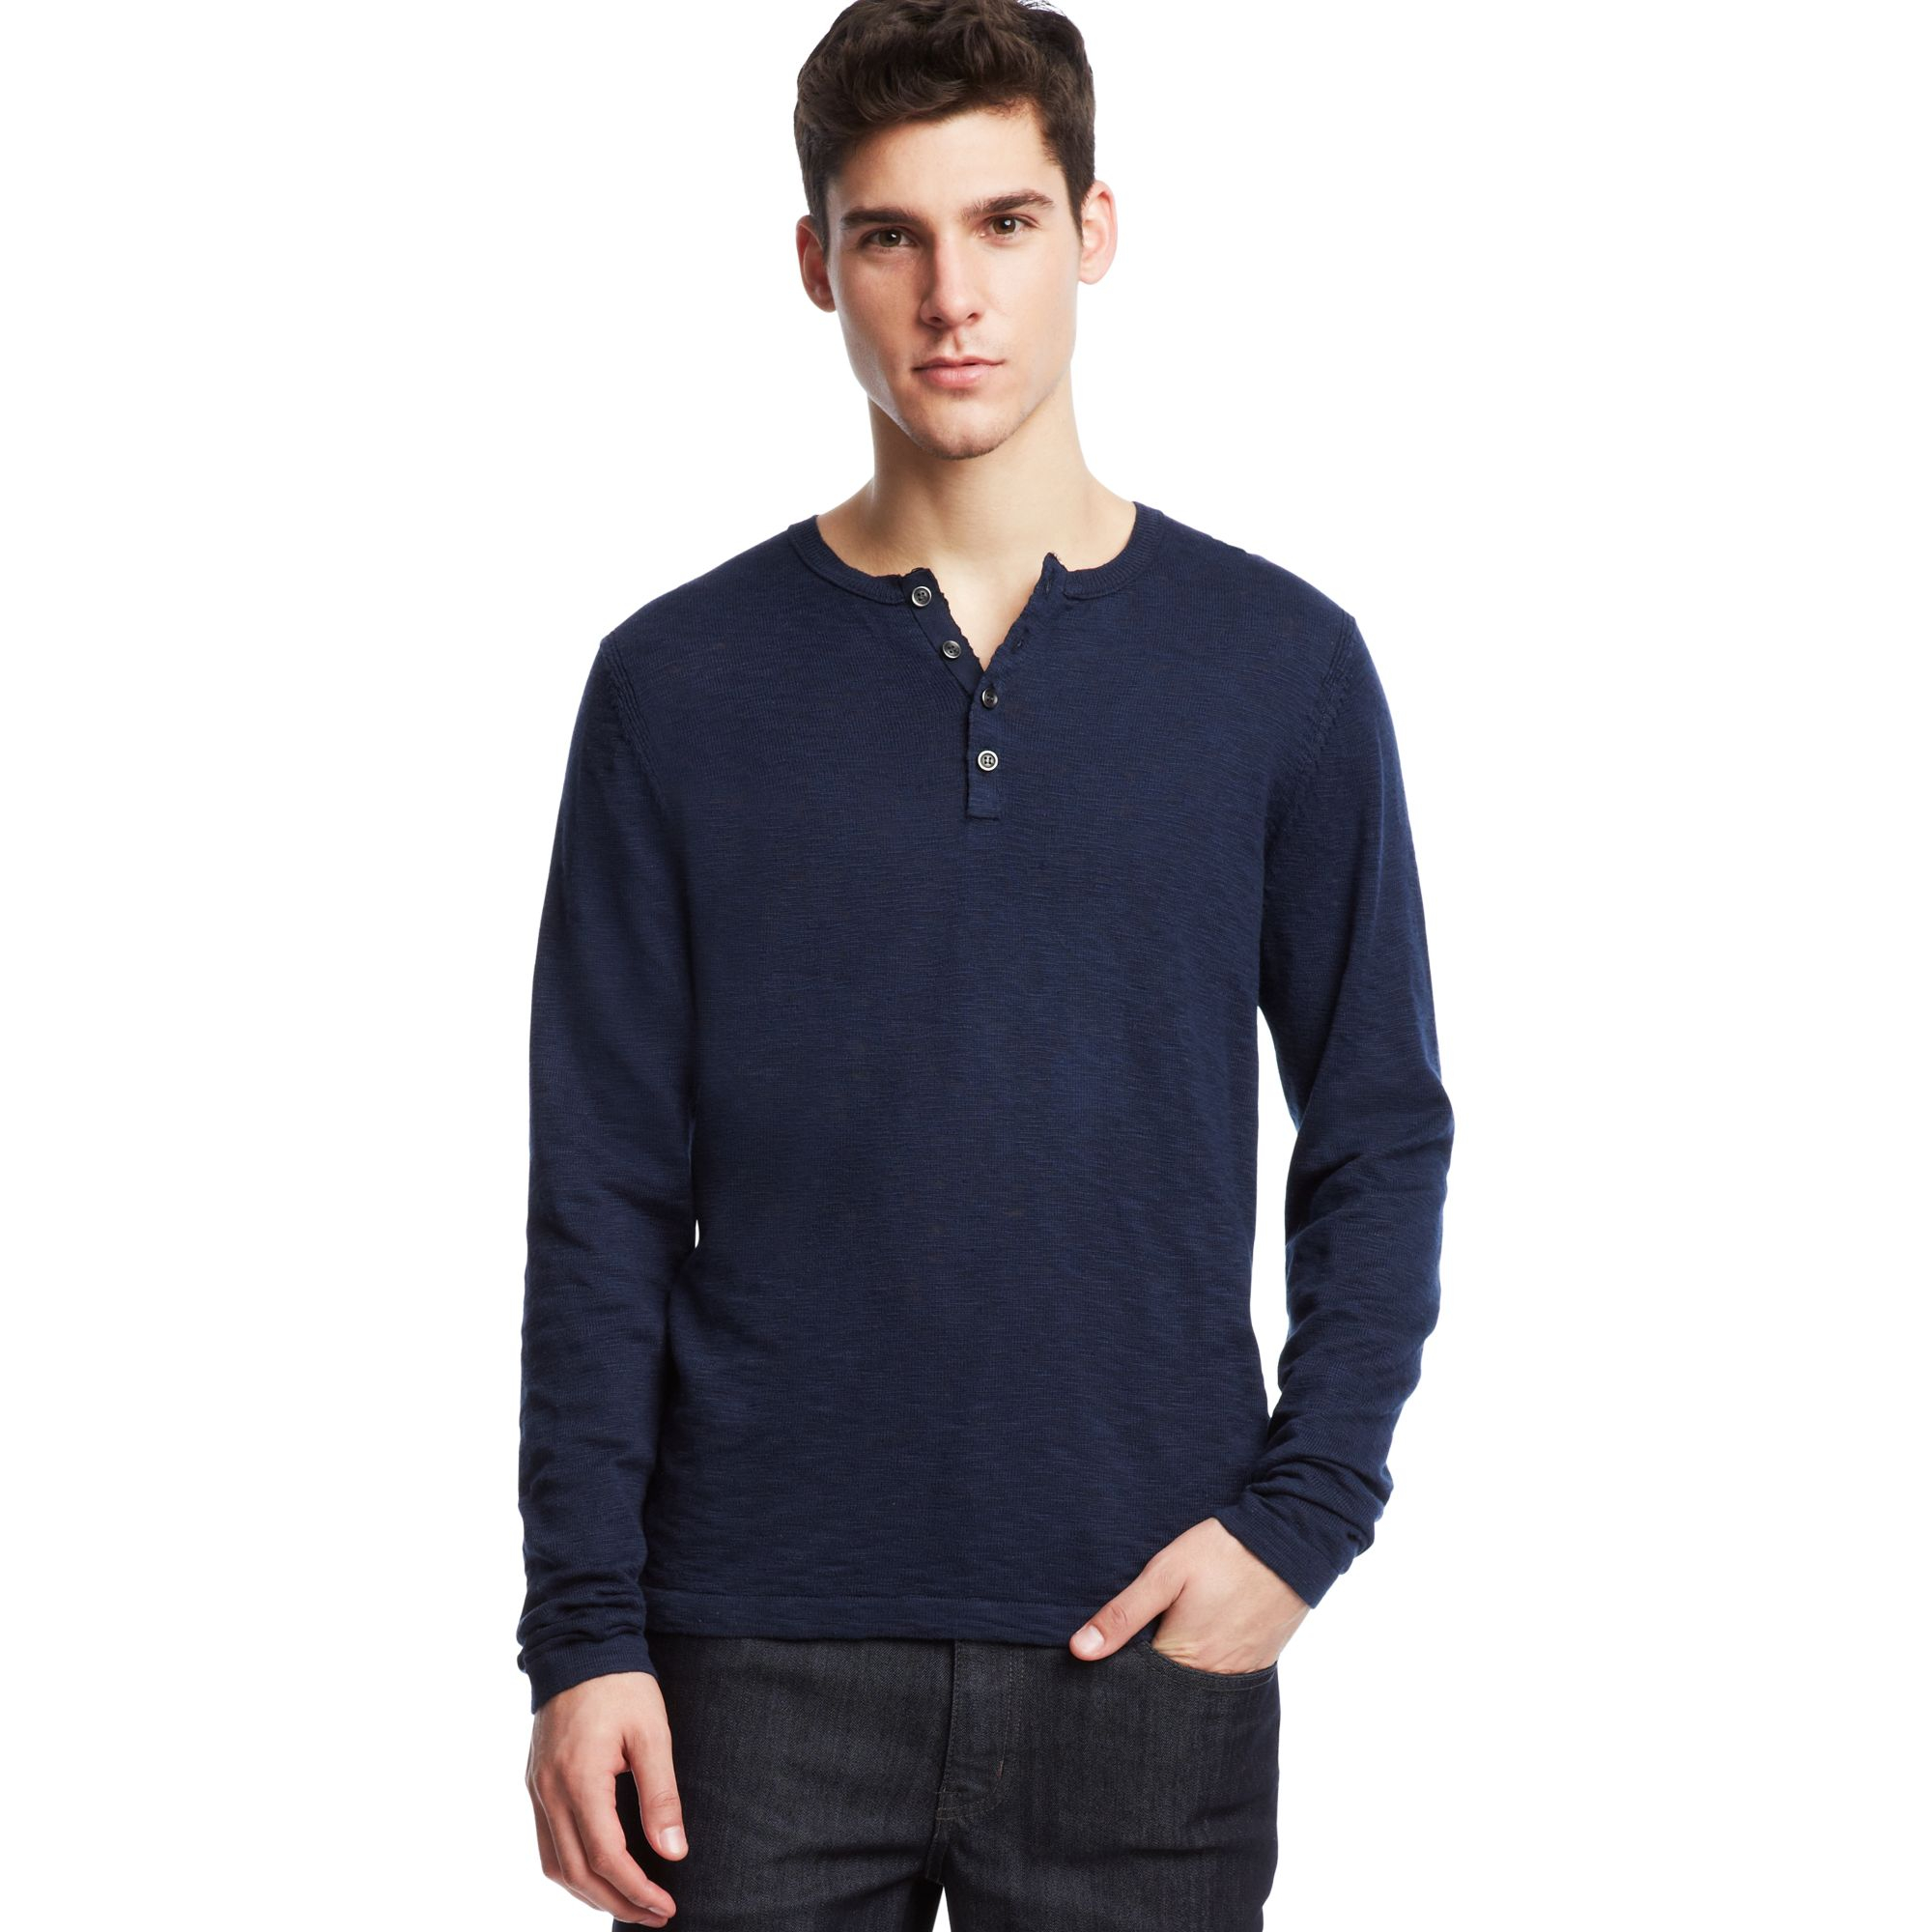 Lyst - Kenneth Cole Reaction Henley Sweater in Blue for Men